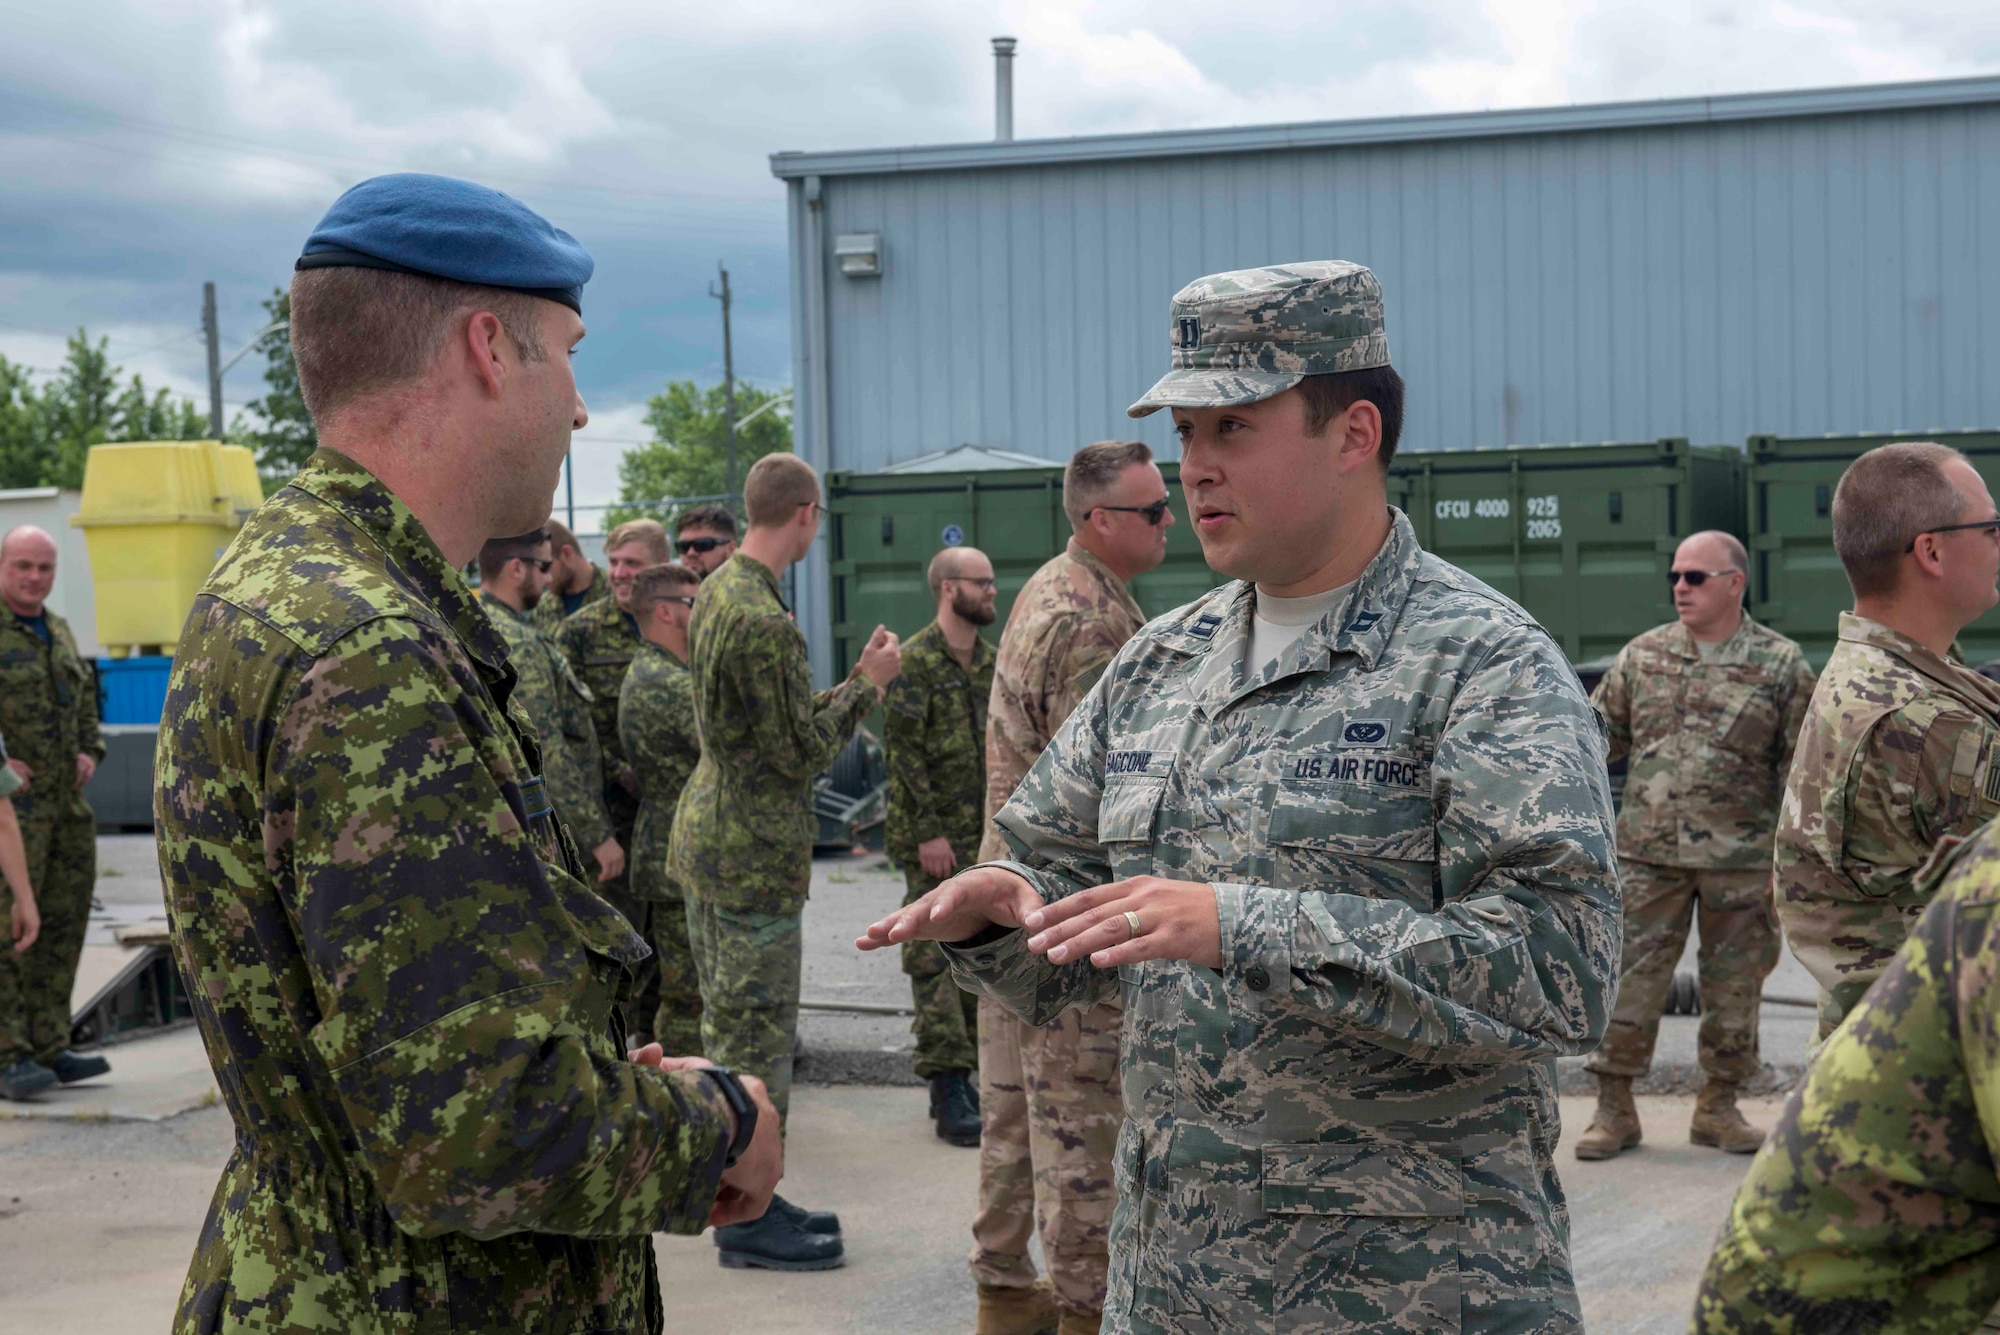 Captain Matthew Saccone talks to a Canadian Officer